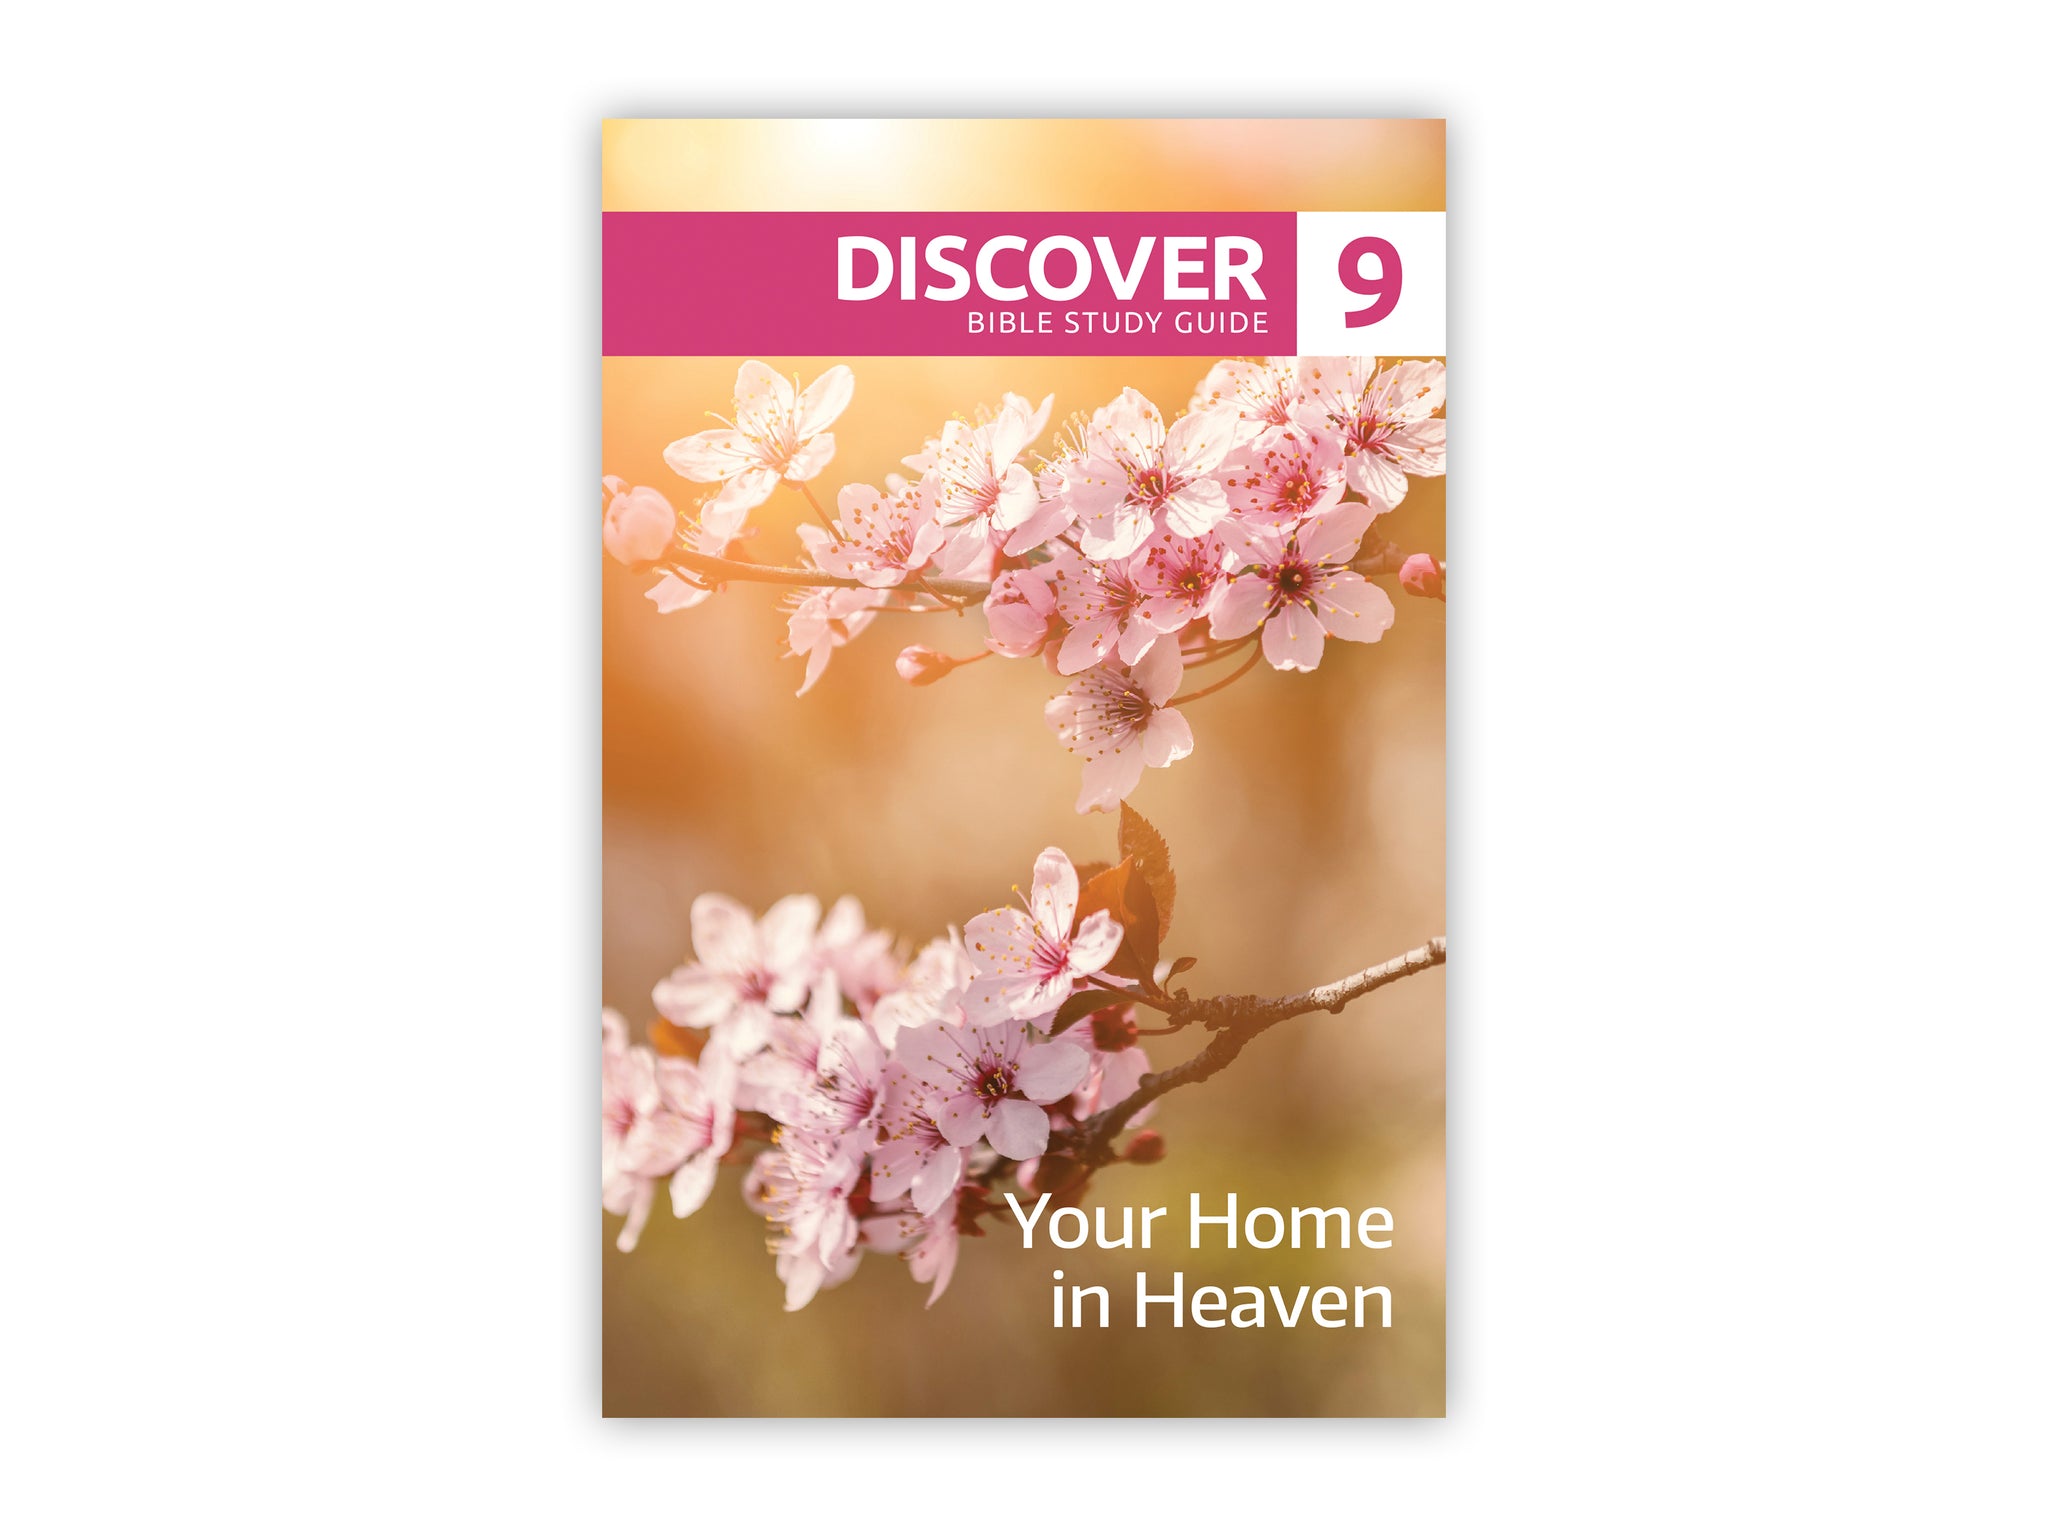 Discover Bible Study Guide #9 - Your Home in Heaven